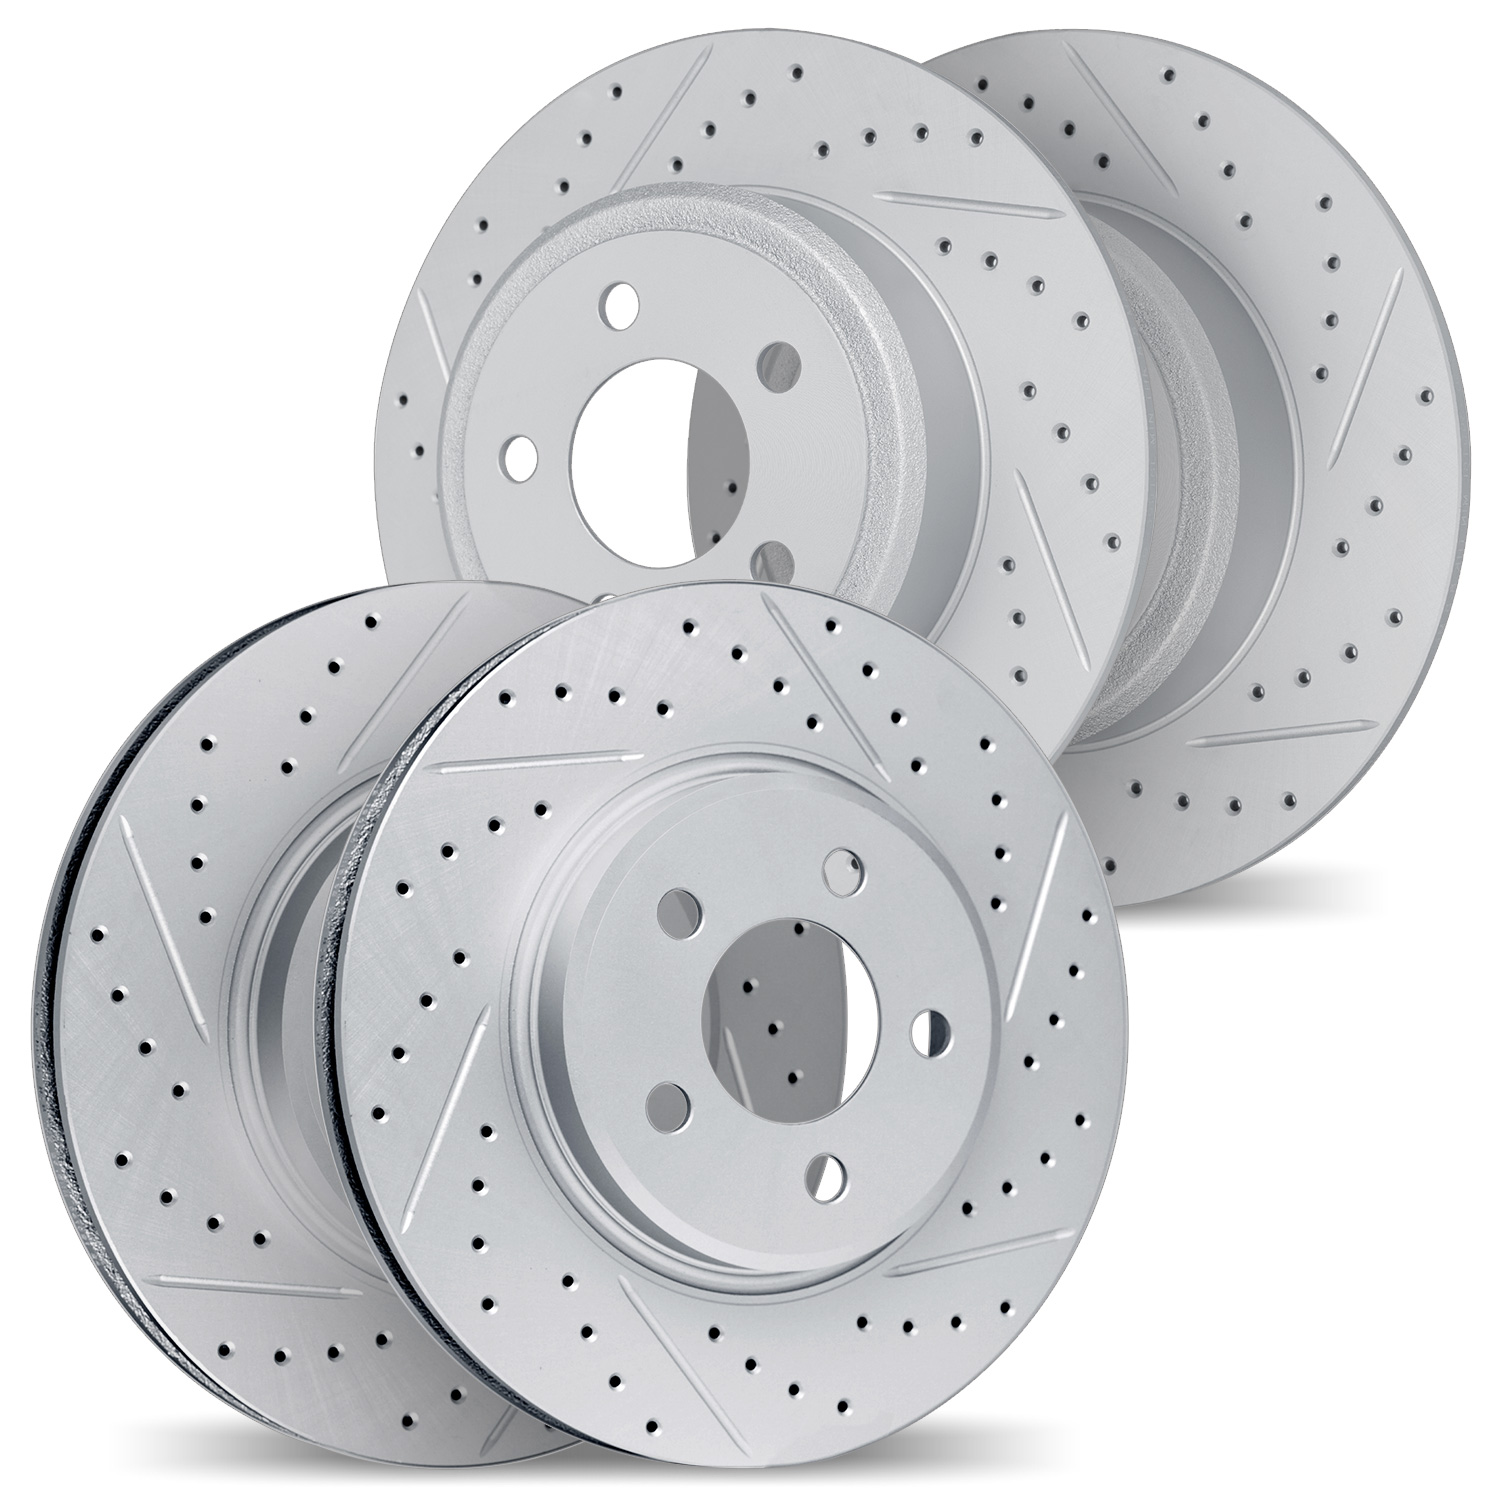 2004-63003 Geoperformance Drilled/Slotted Brake Rotors, 1987-1993 Mercedes-Benz, Position: Front and Rear